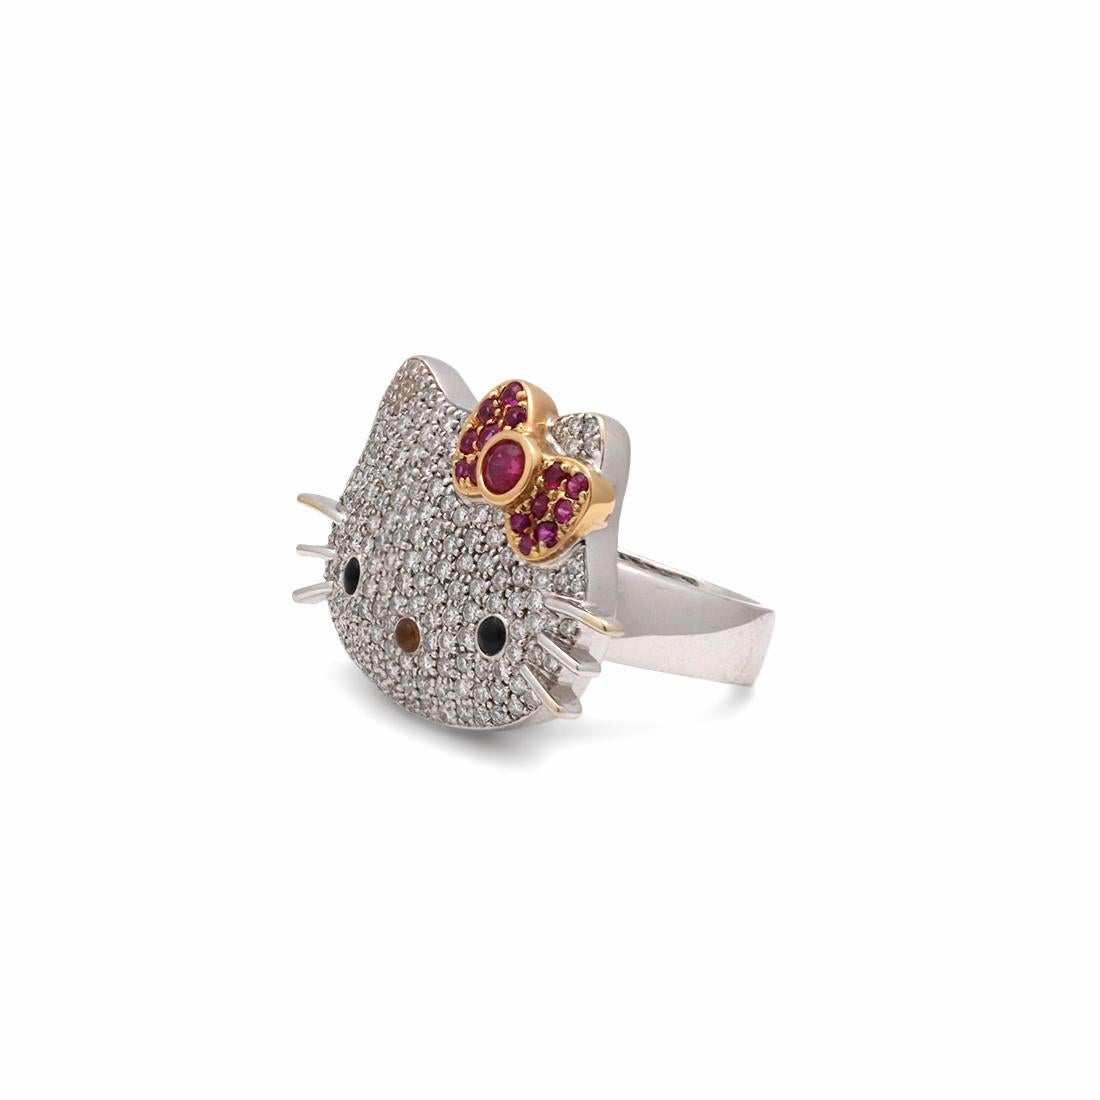 Sanrio's whimsical Hello Kitty character reimagined by Kimora Lee Simmons as ring crafted in 18 karat White gold. The ring is set with approx. 1.20 carats of round brilliant cut diamonds (F-G color, VS clarity). Hello Kitty's signature bow is set